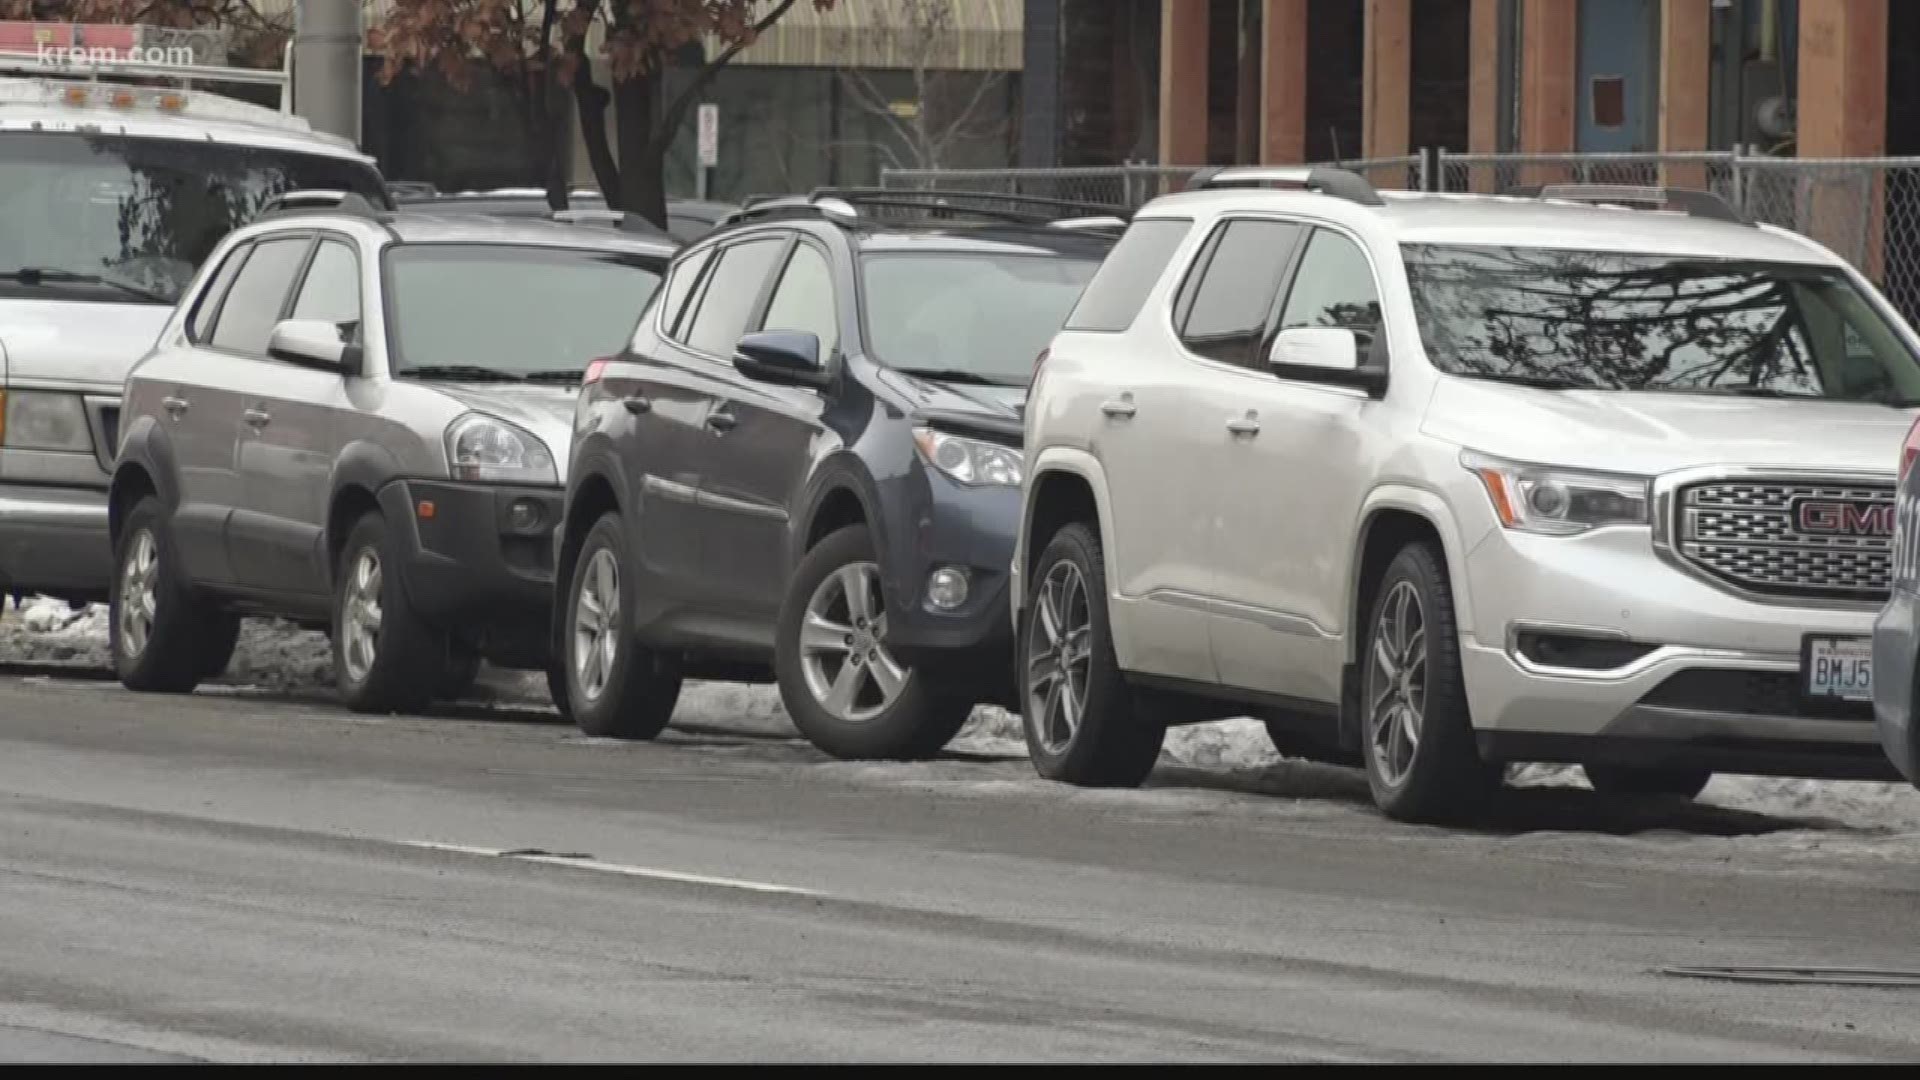 KREM Reporter Amanda Roley finds out more about a parking study that recommended longer parking times for the City of Spokane.